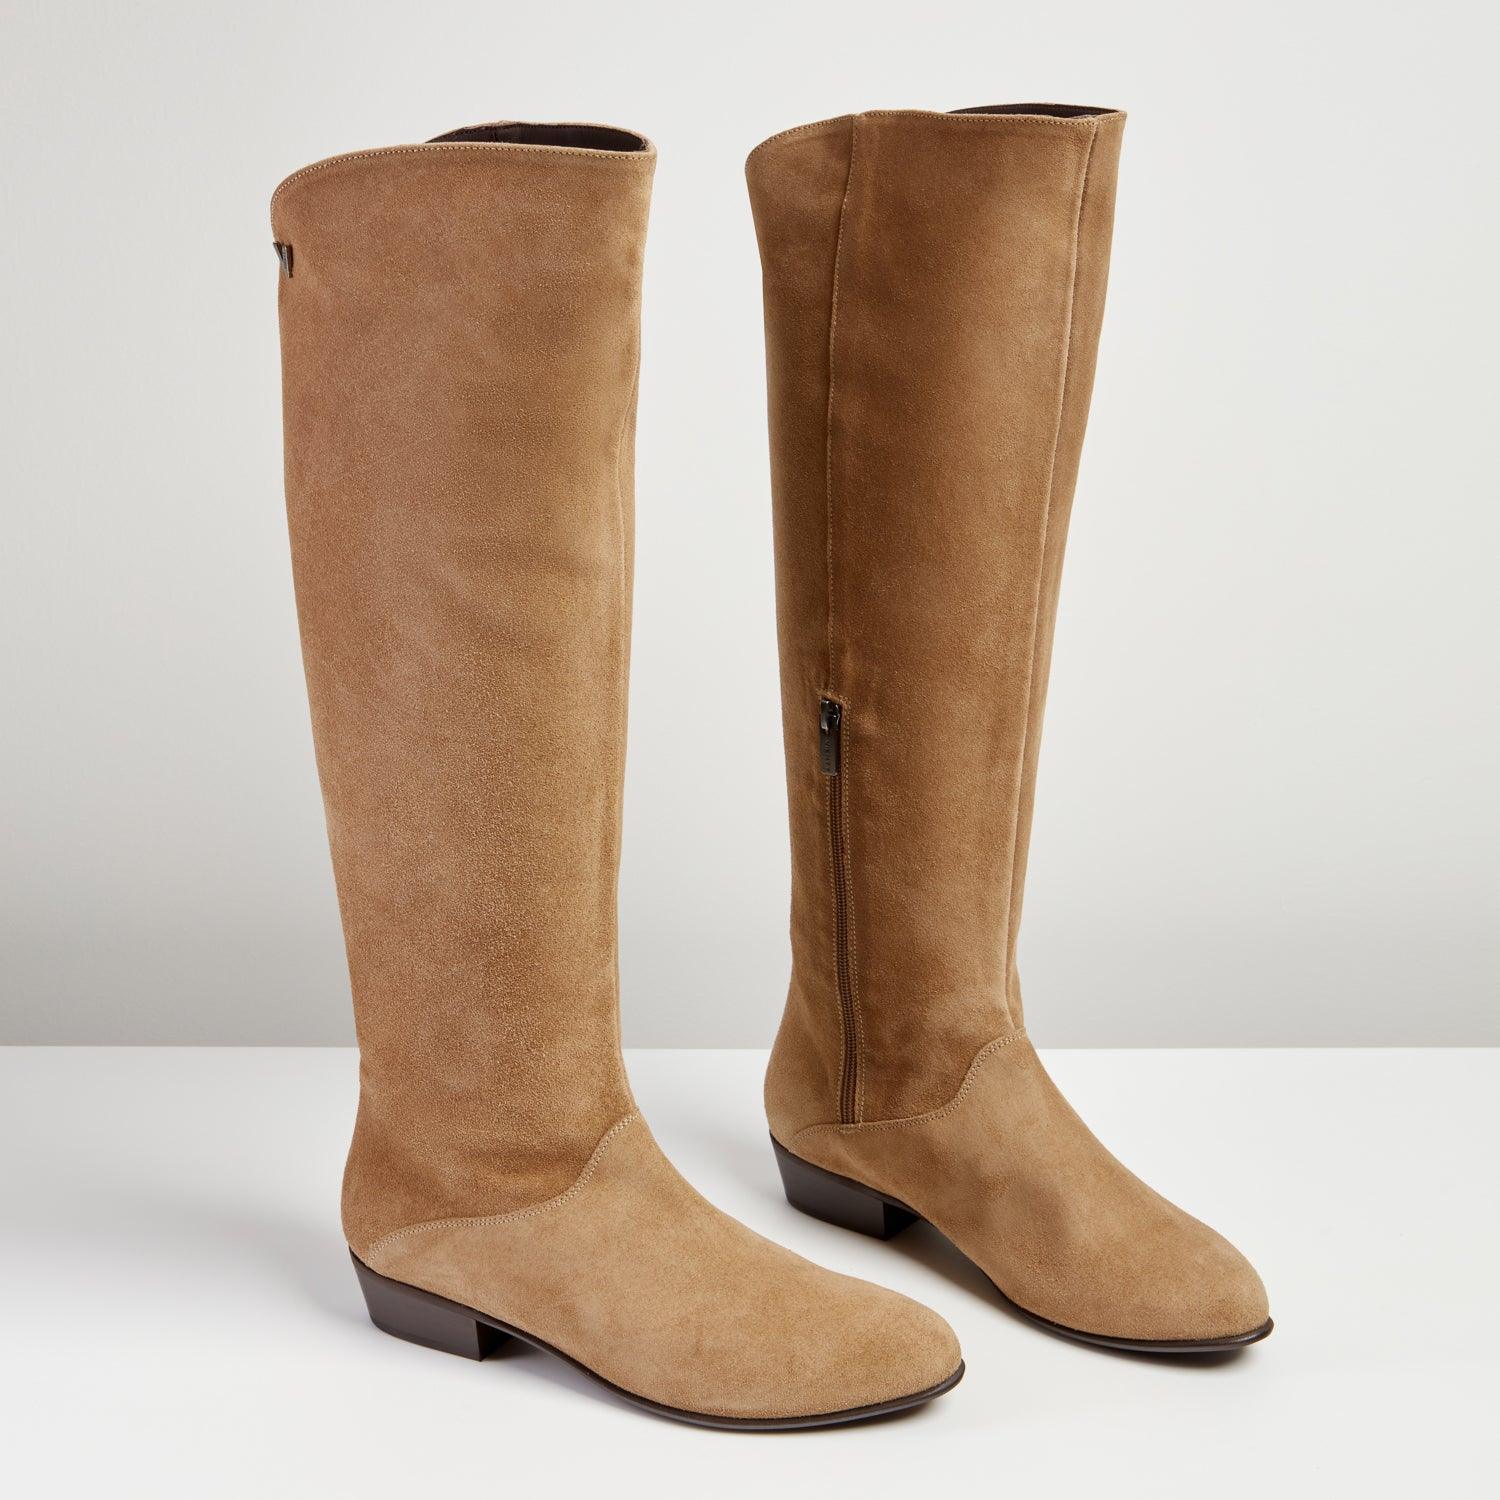 Vienty Knee High Tan Suede Boot - MADE THE EDIT